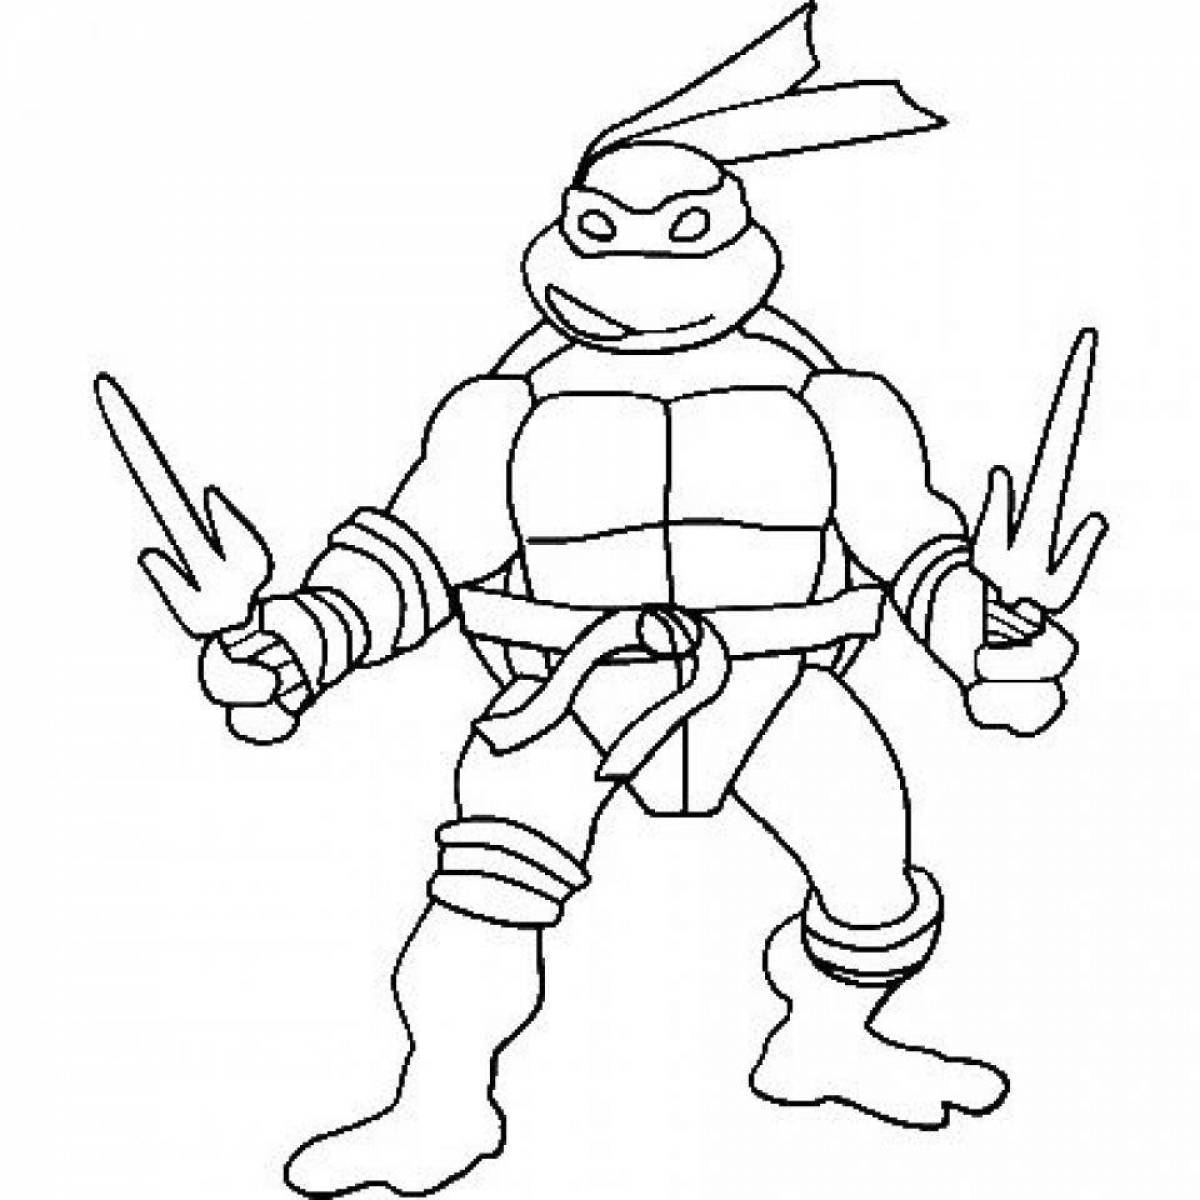 Awesome Teenage Mutant Ninja Turtles coloring pages for boys